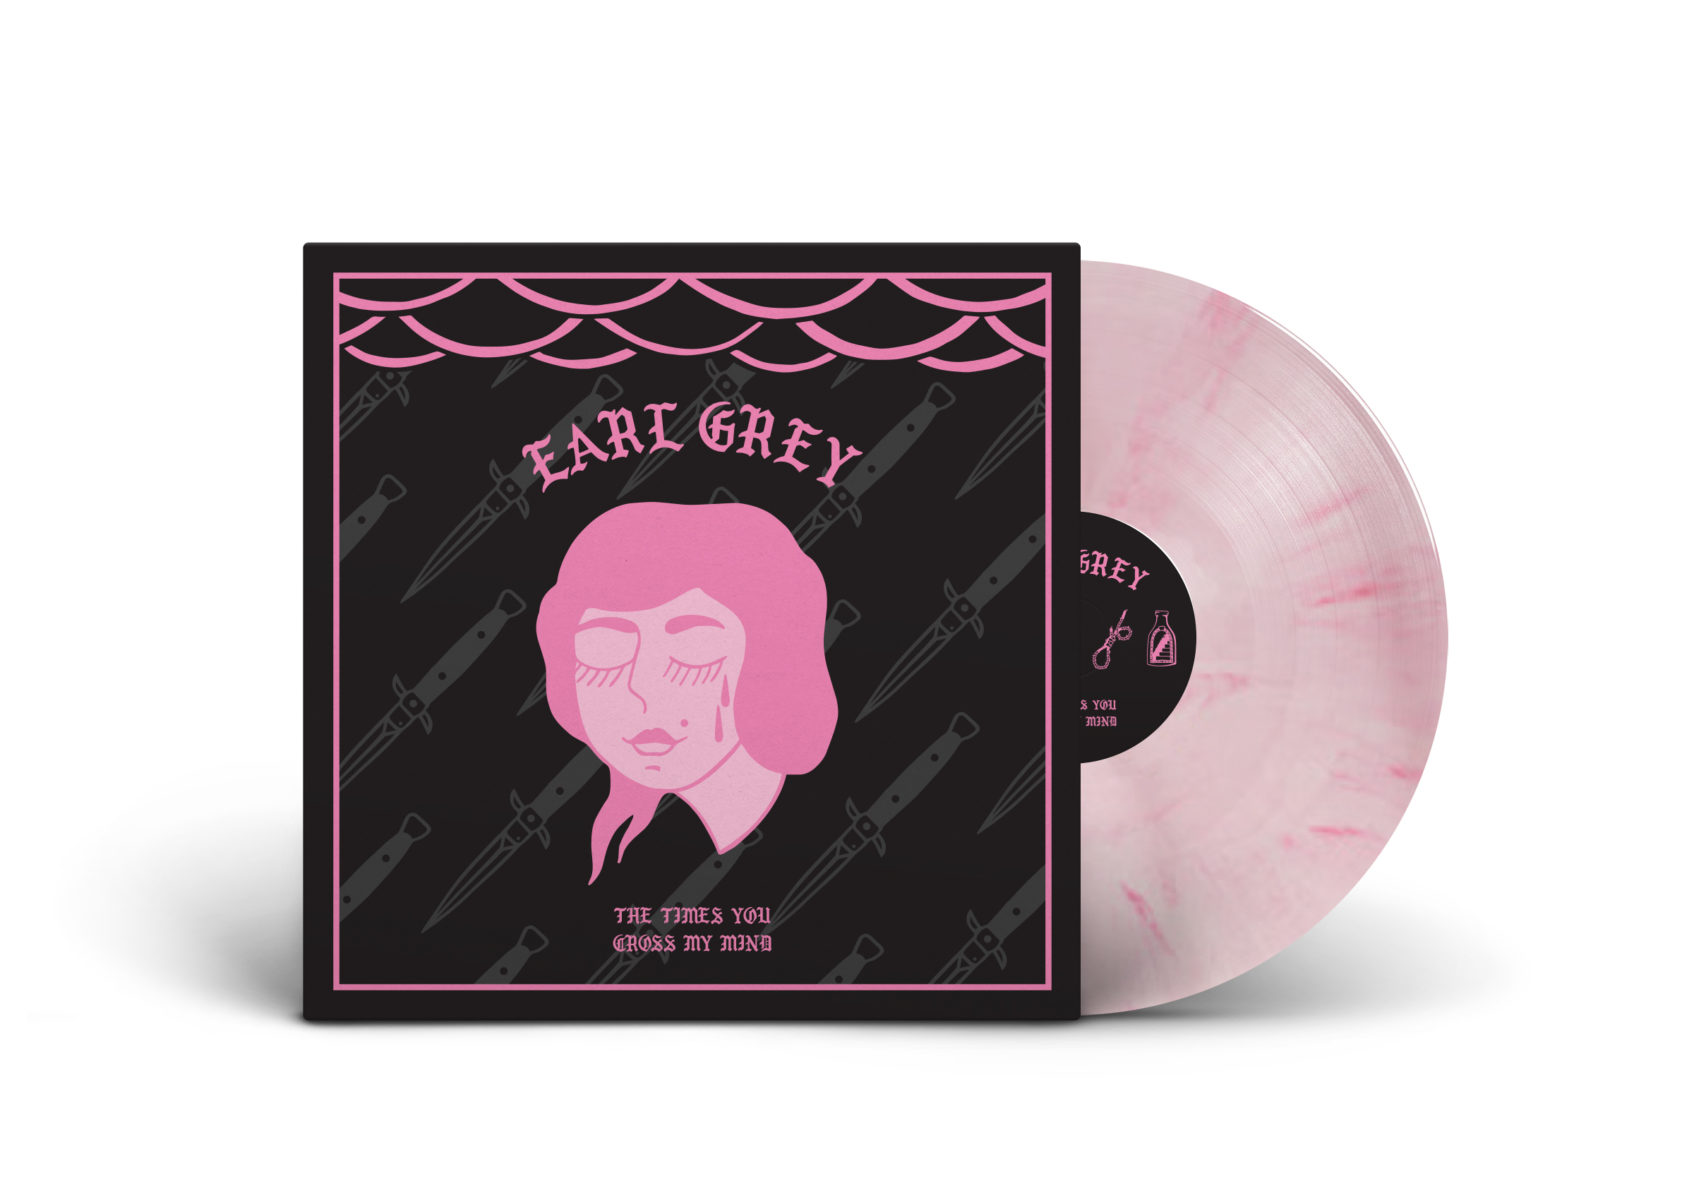 Earl Grey - "The Times You Cross My Mind" (LP 12" - white-red marbled)